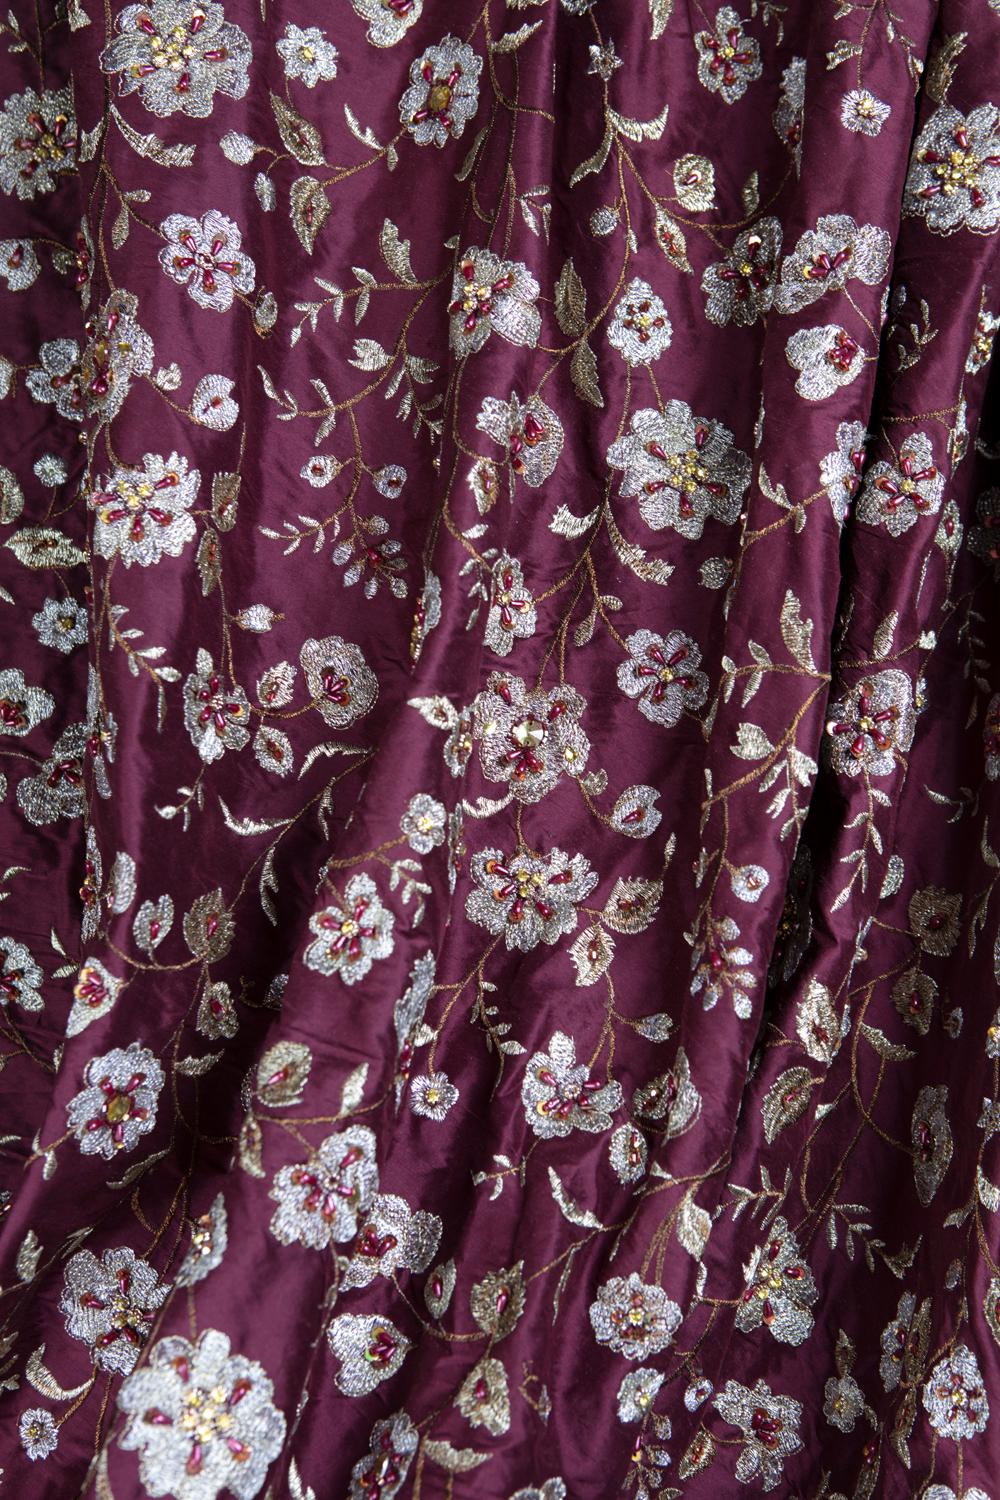 Elaborately Embroidered, Garnet Raw Silk, Indian Handricraft, Bejewelled Flowers In Excellent Condition For Sale In Asheville, NC